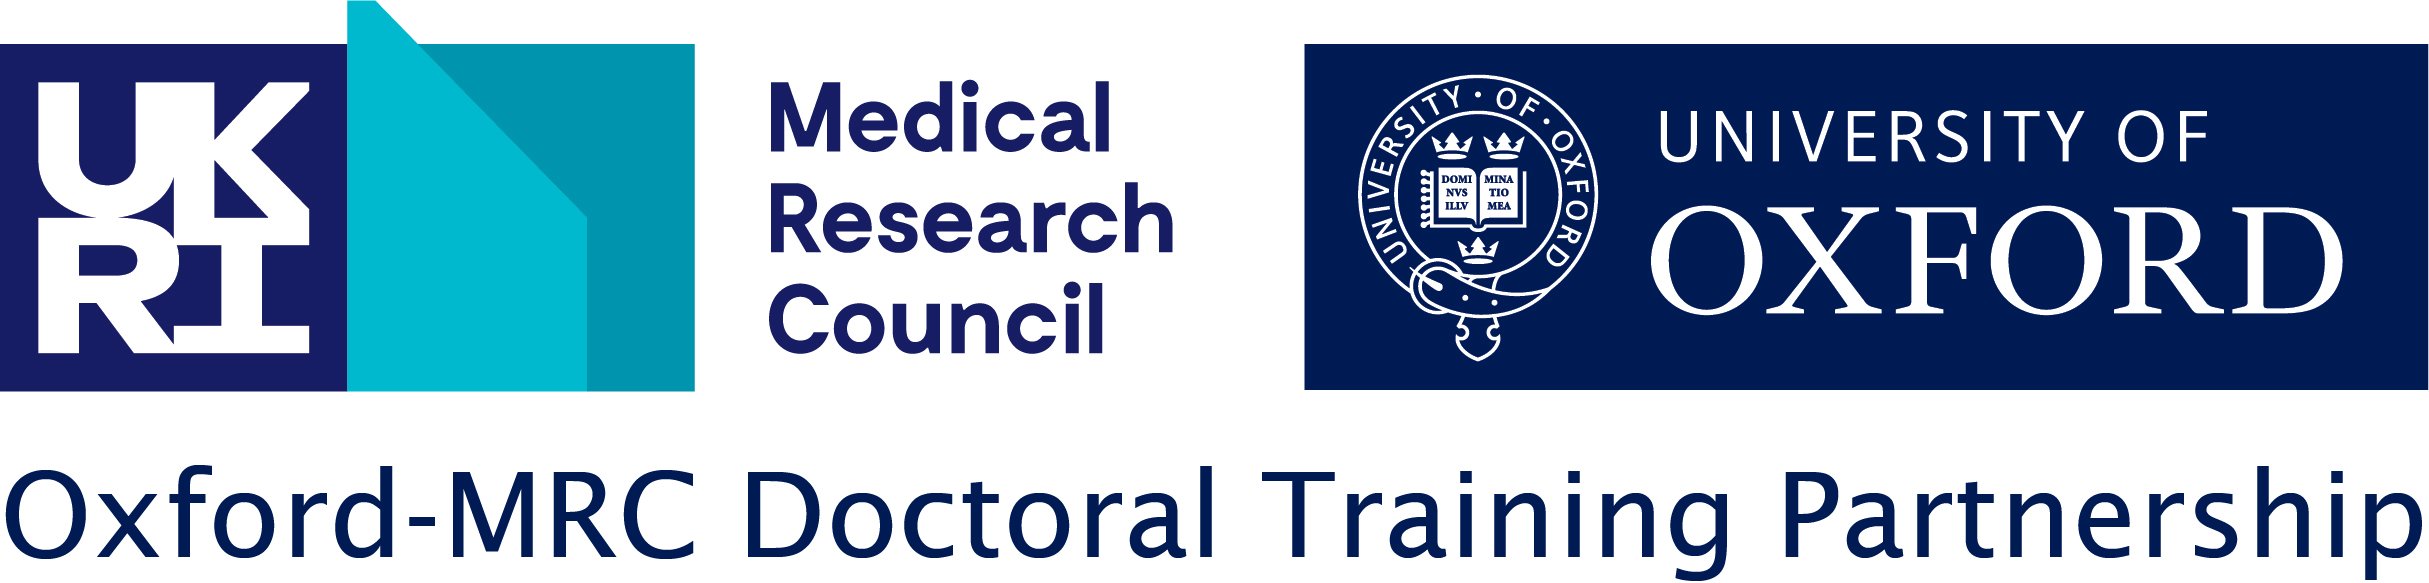 Oxford and Medical Research Council joint logos